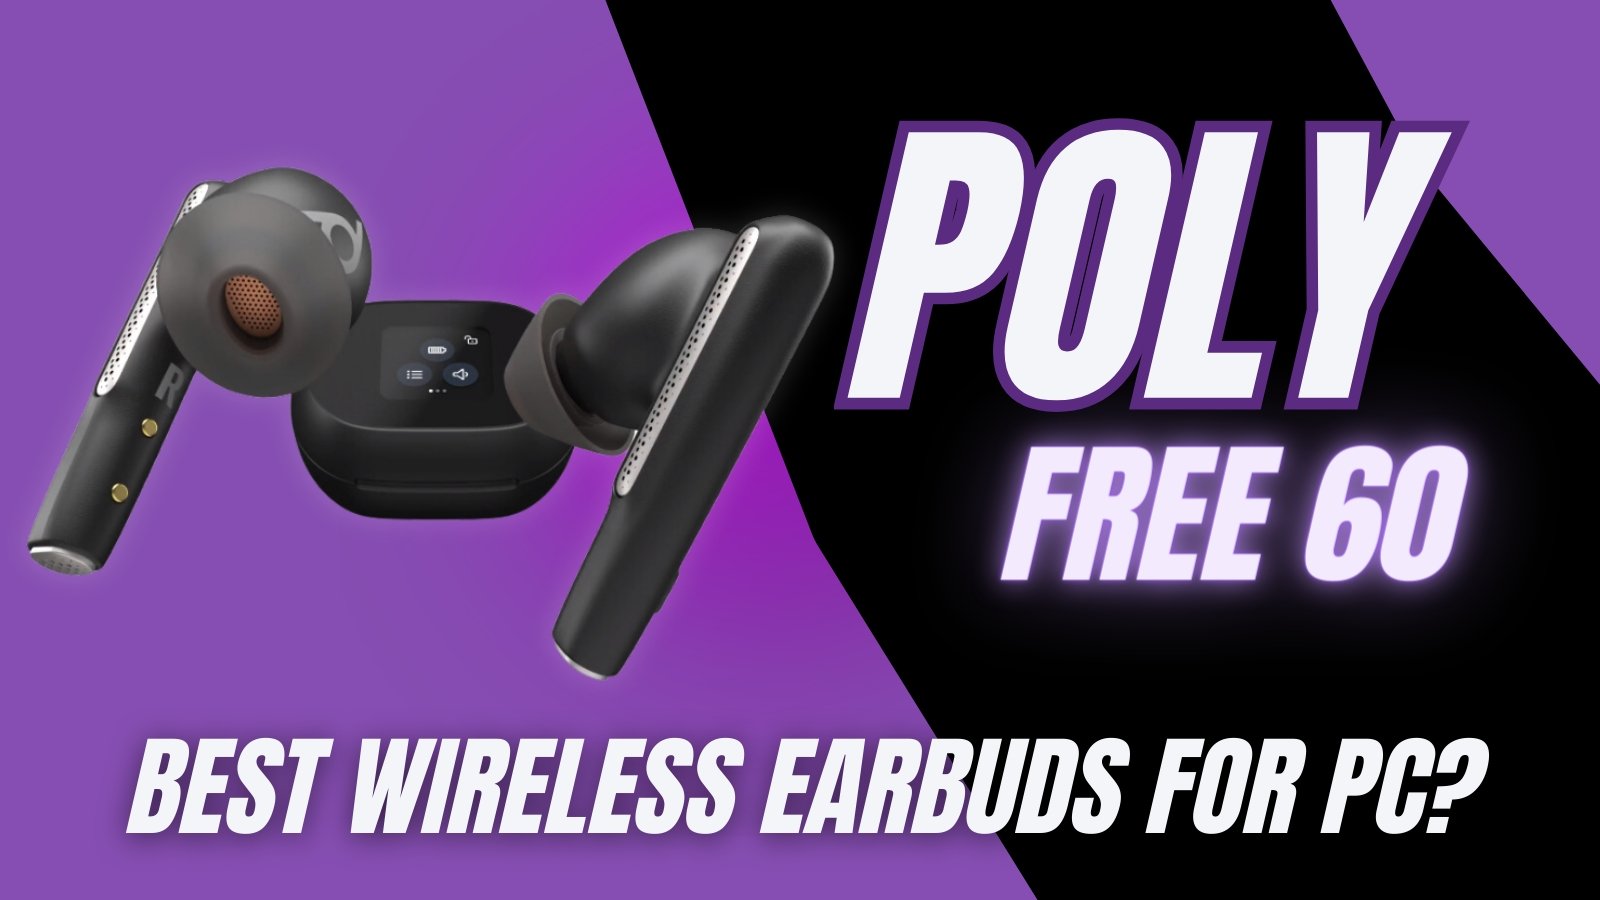 Are The Poly Voyager Free 60 The Best Earbuds For PC?